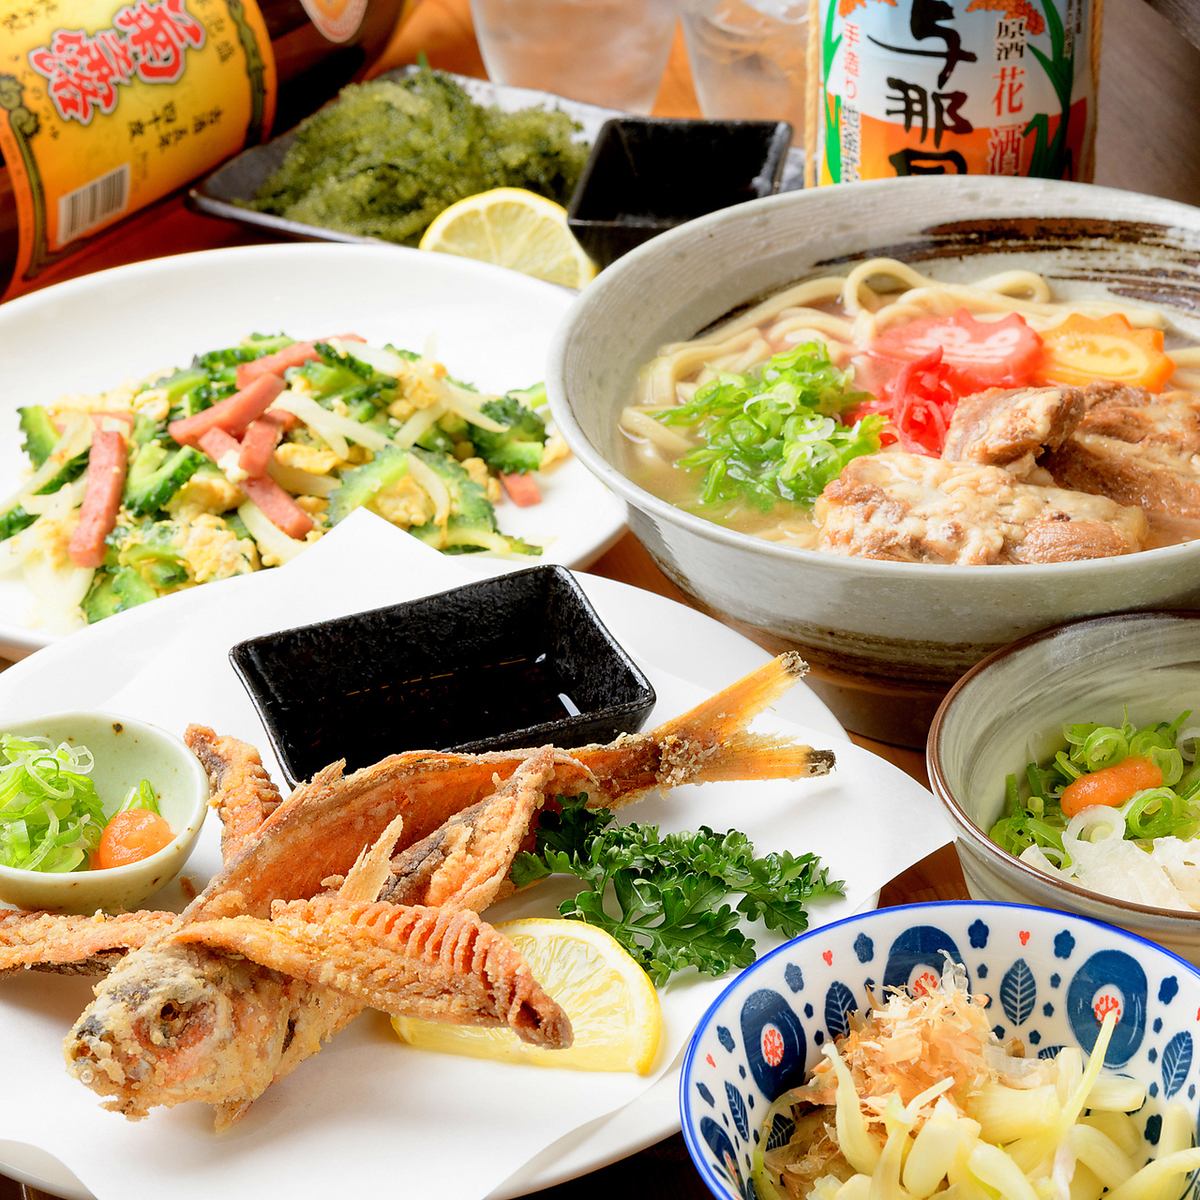 [Near Kashiwa Station ◇] Okinawan cuisine that the store owner shook his arm is exquisite ☆ You can also enjoy Awamori ♪